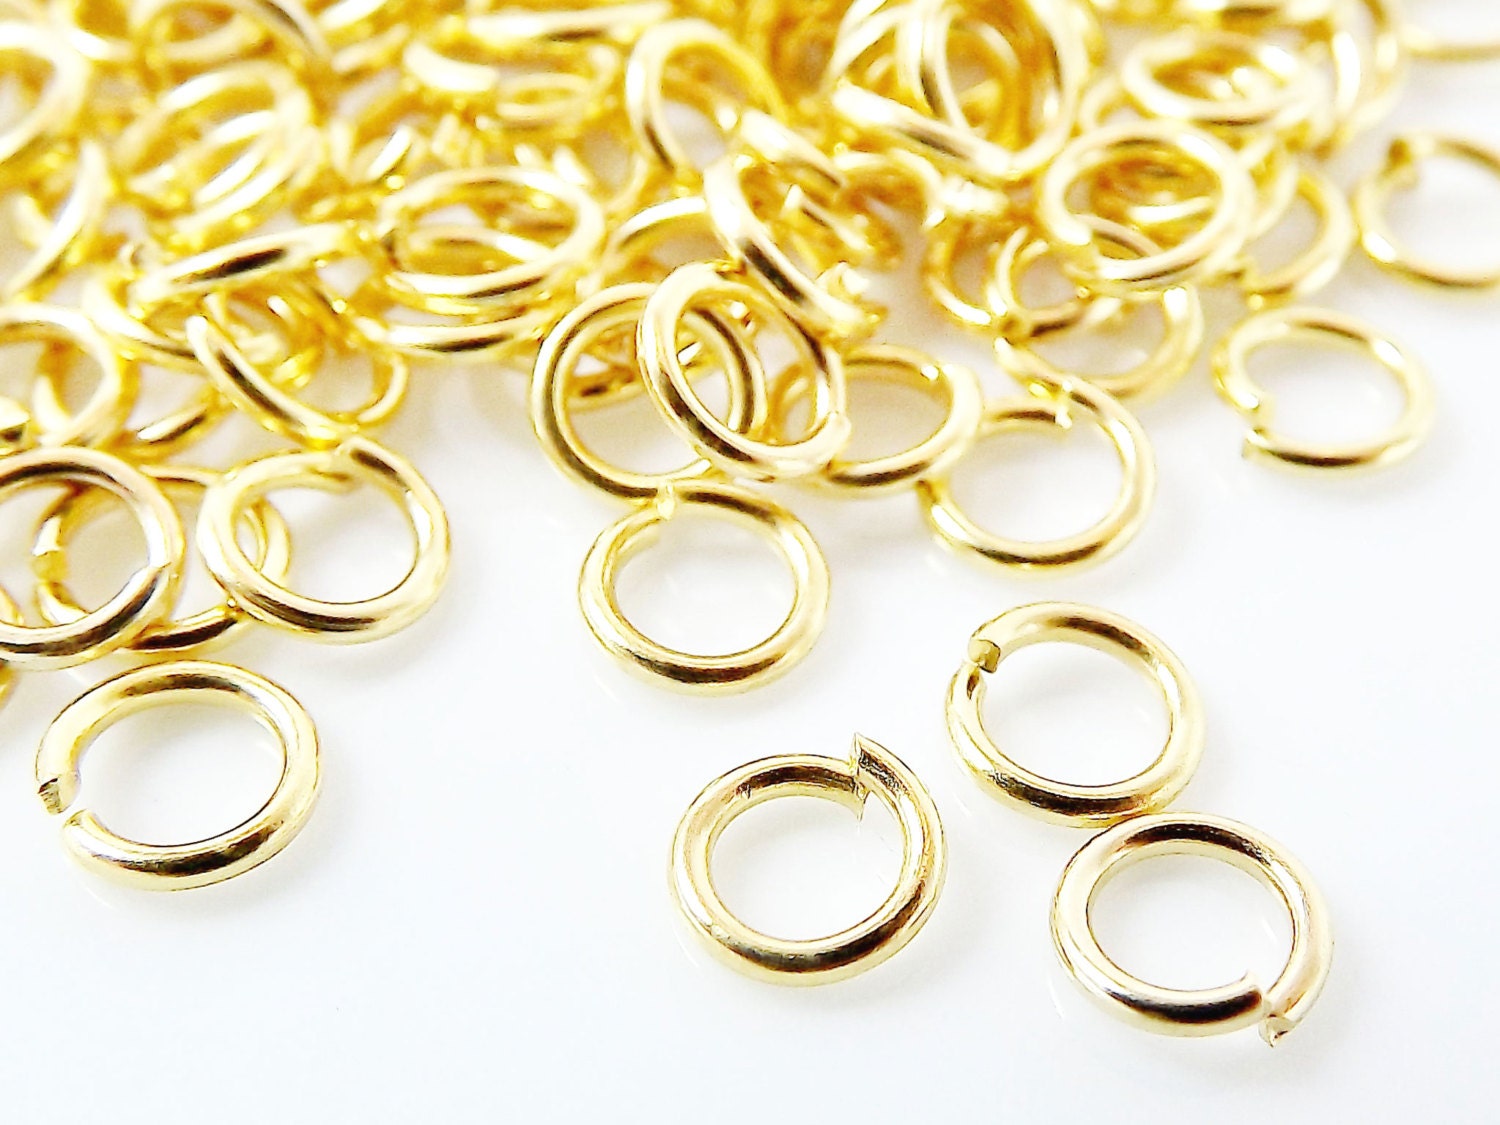 5mm Gold Jump Rings Round Smooth Gold Findings, Gold Supplies, Link, Ring, Loop, Jewelry Findings - Shiny 22k Gold Plated Brass - 30 pcs